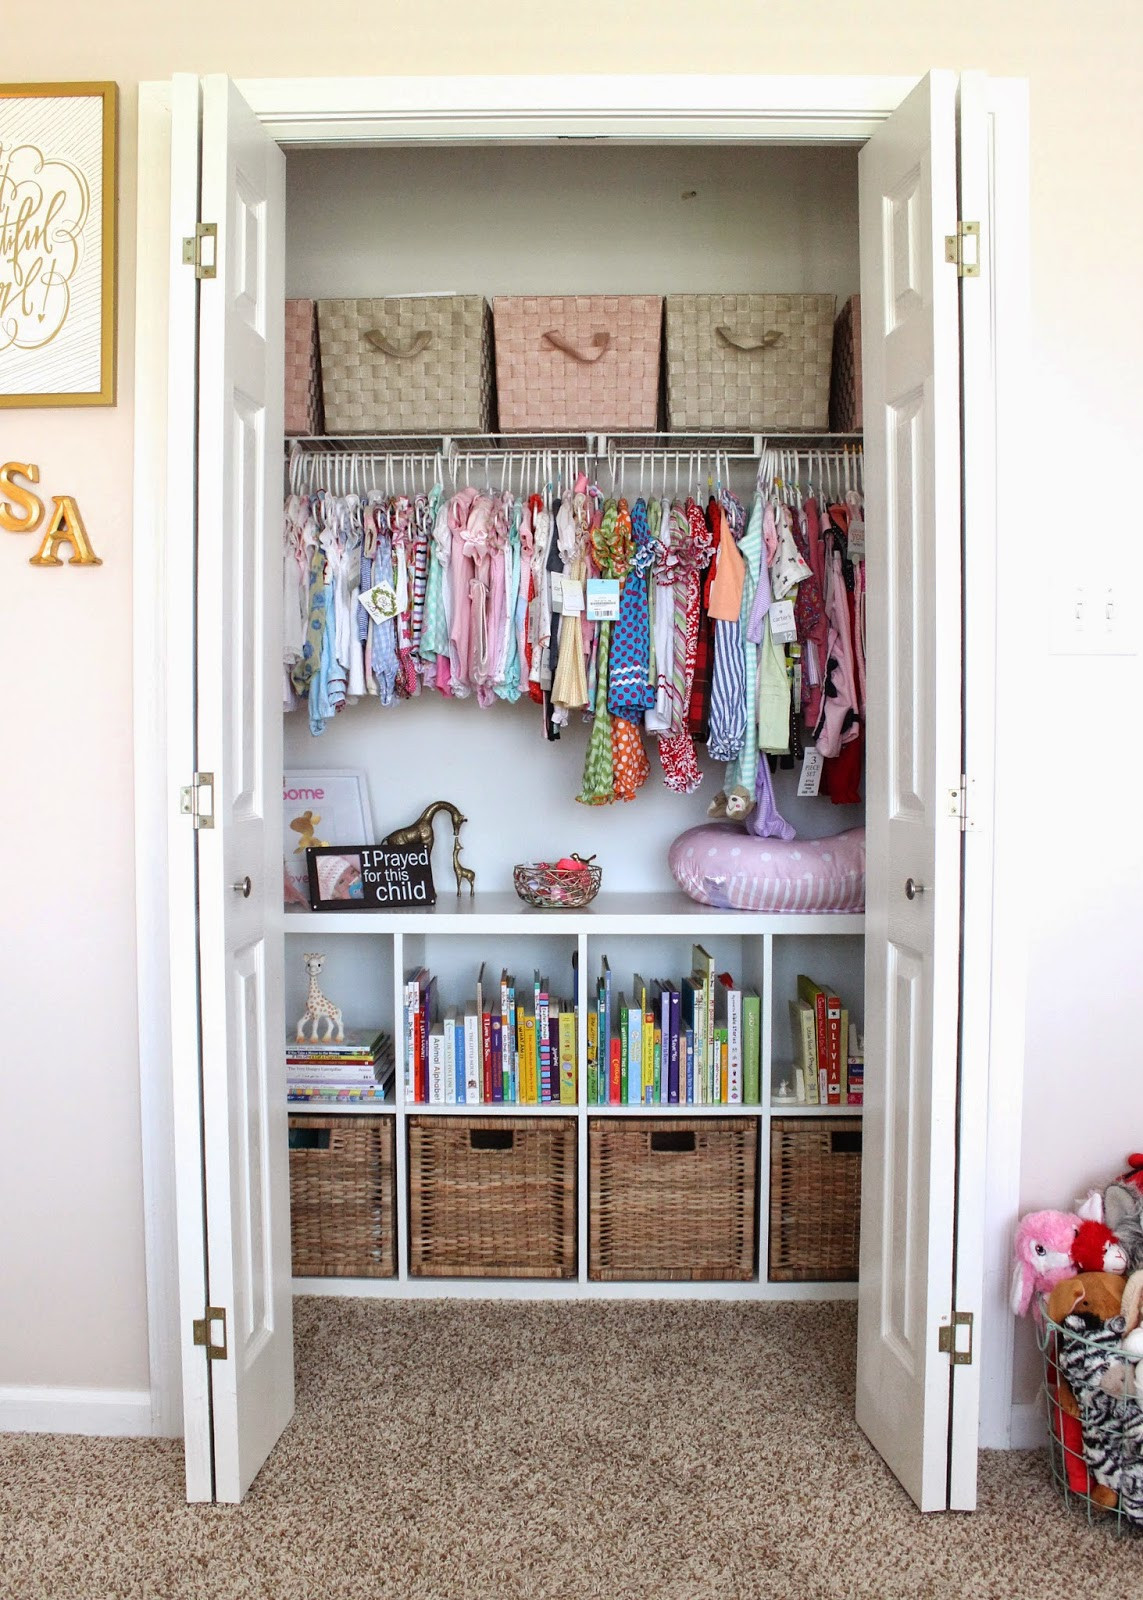 How To Organize Kids Room When It Is Small
 Fantastic Ideas for Organizing Kid s Bedrooms